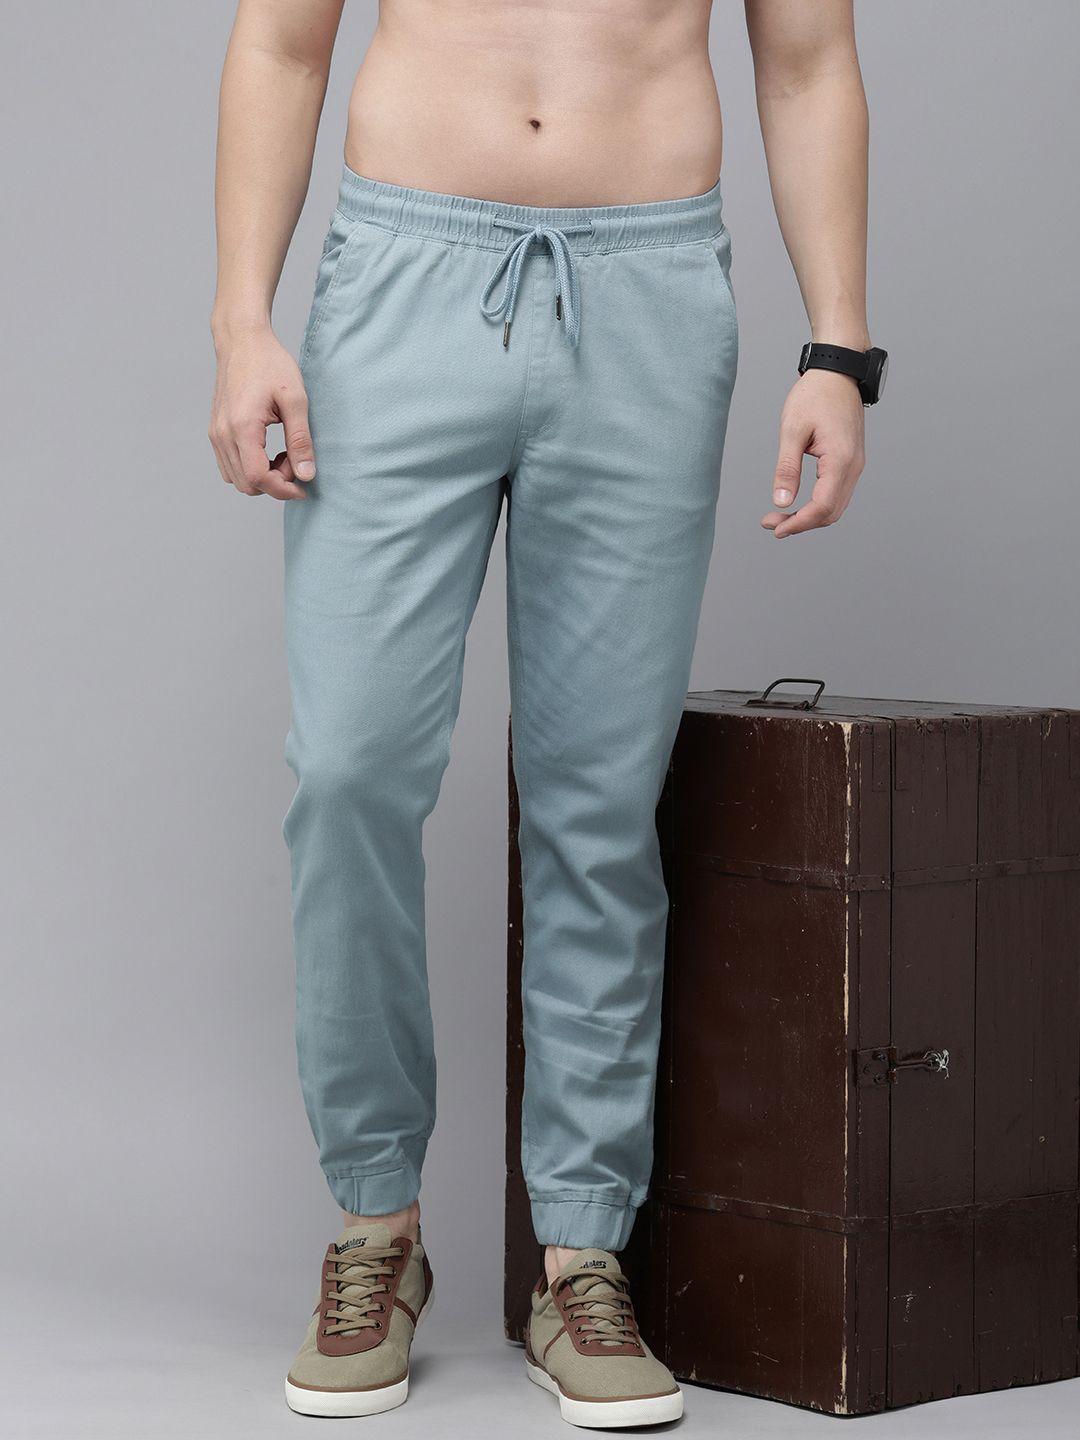 the-roadster-life-co.-men-mid-rise-joggers